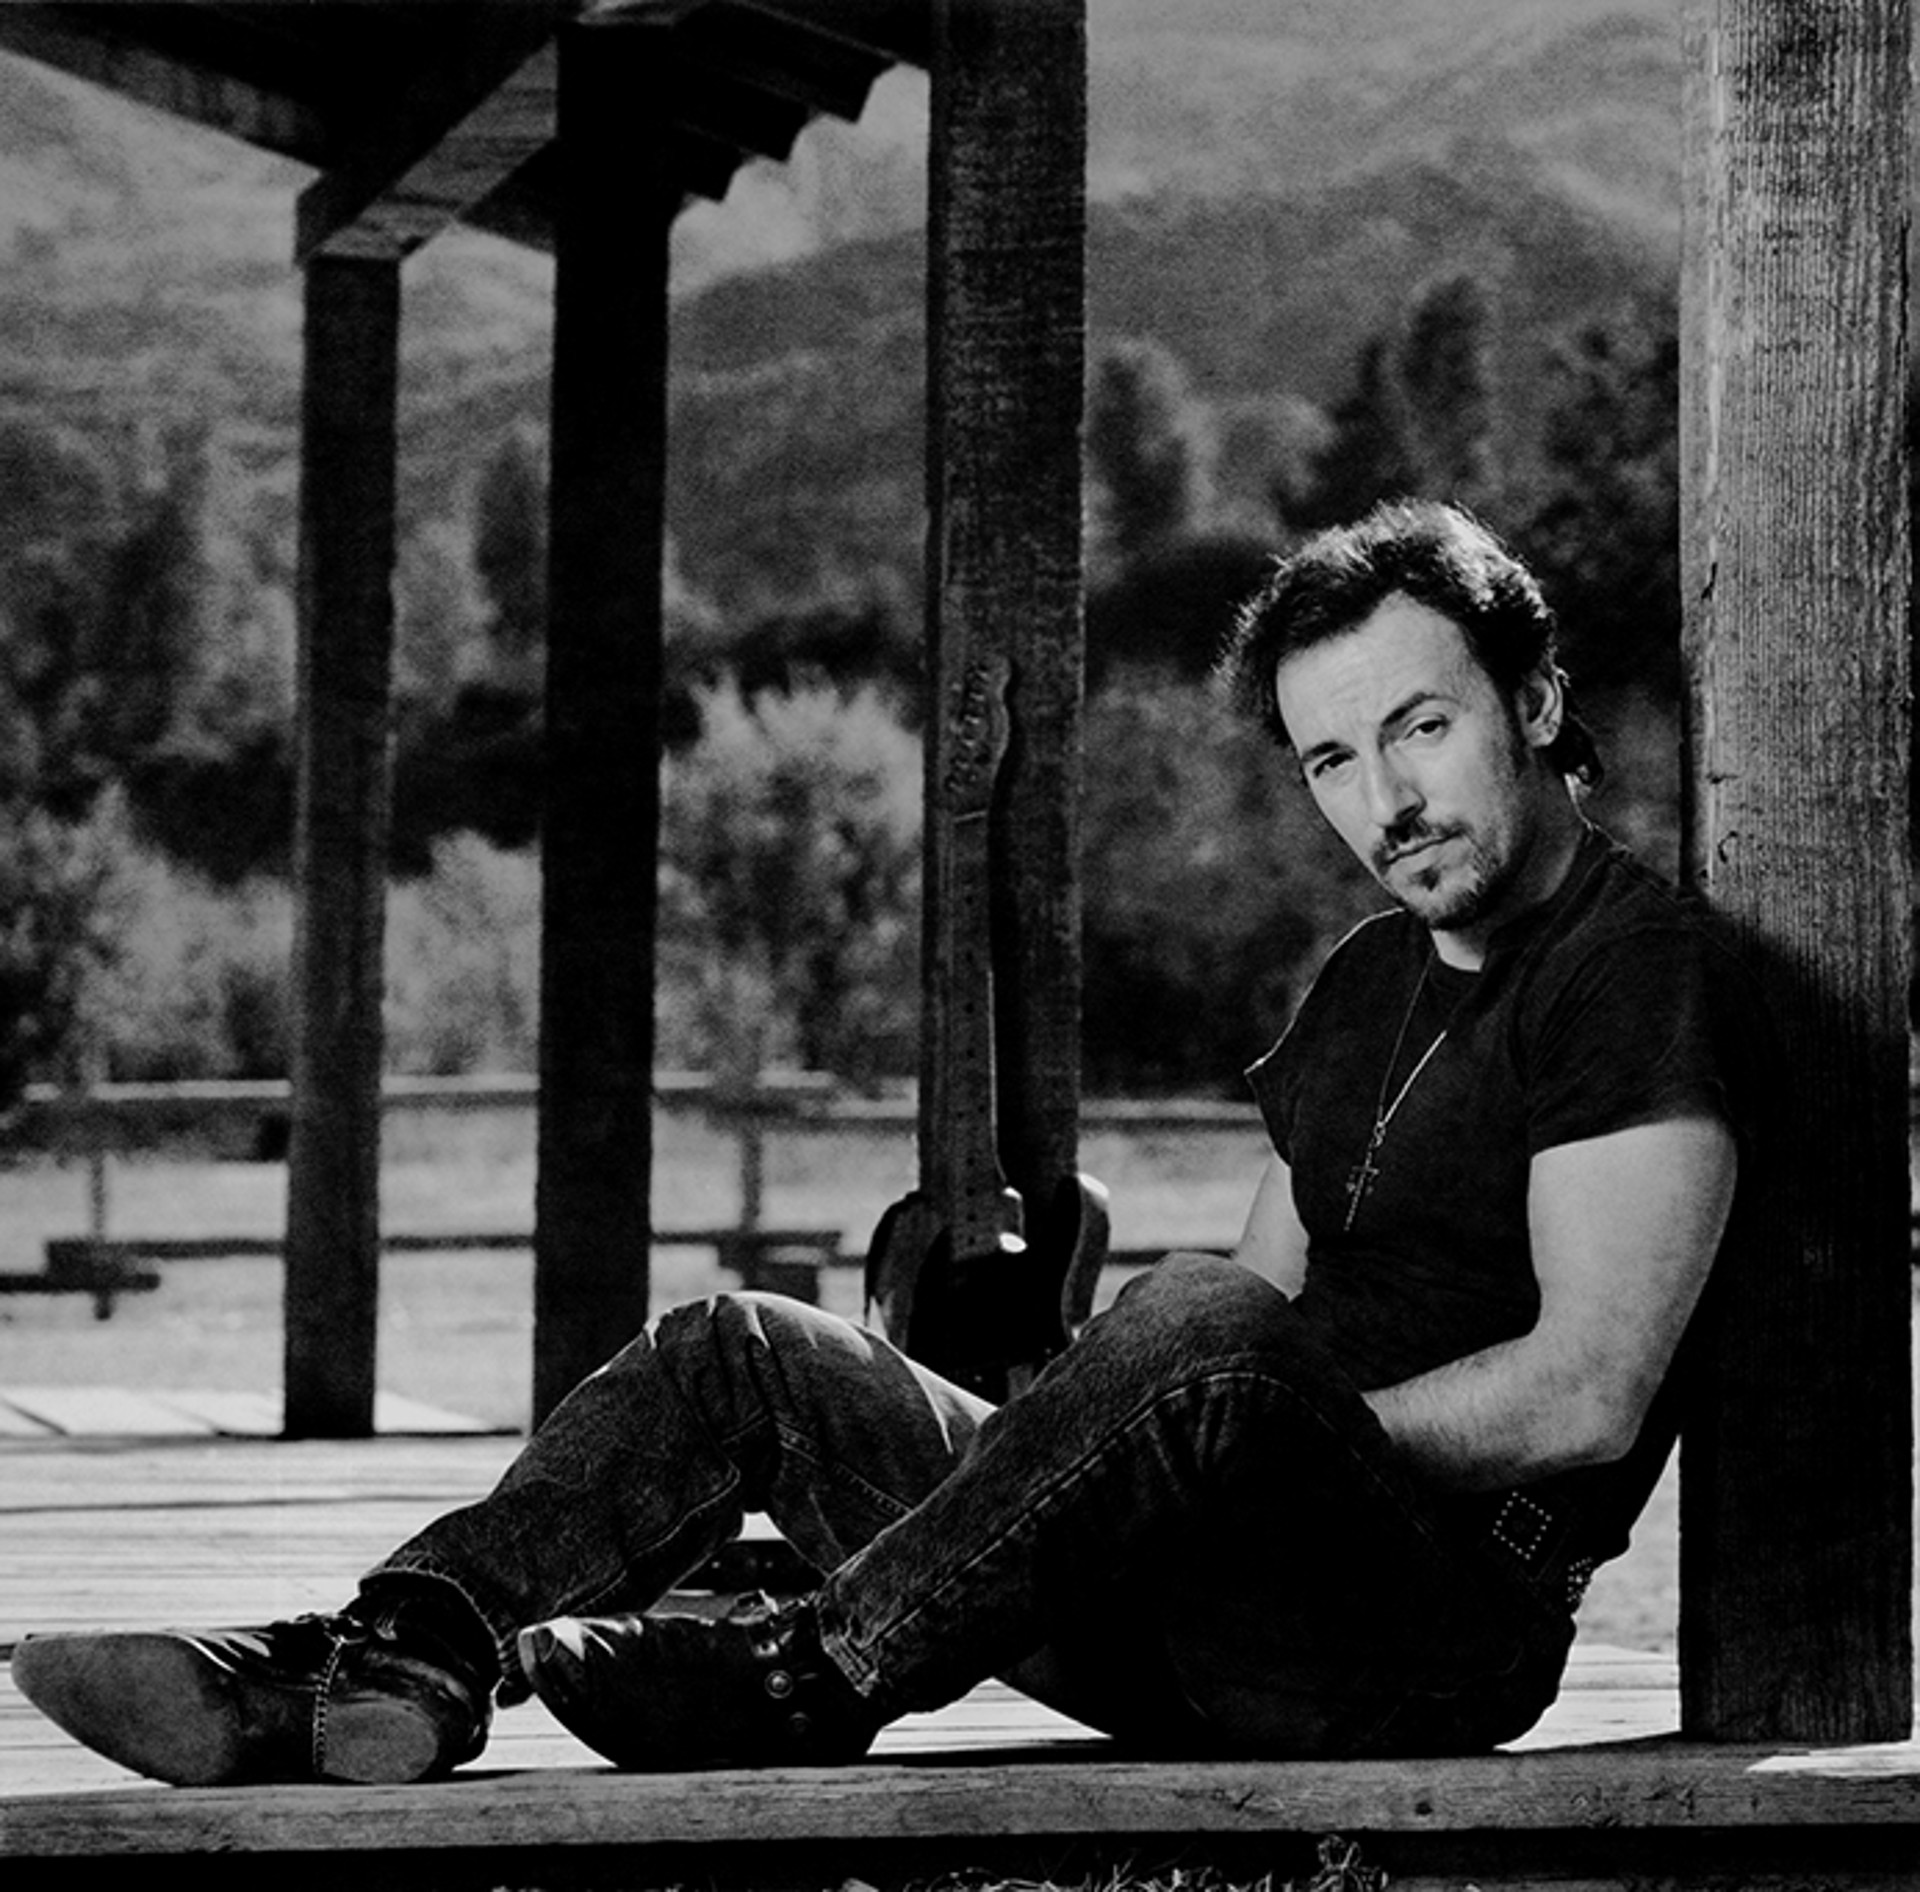 91152 Bruce Springsteen Porch F13 BW by Timothy White